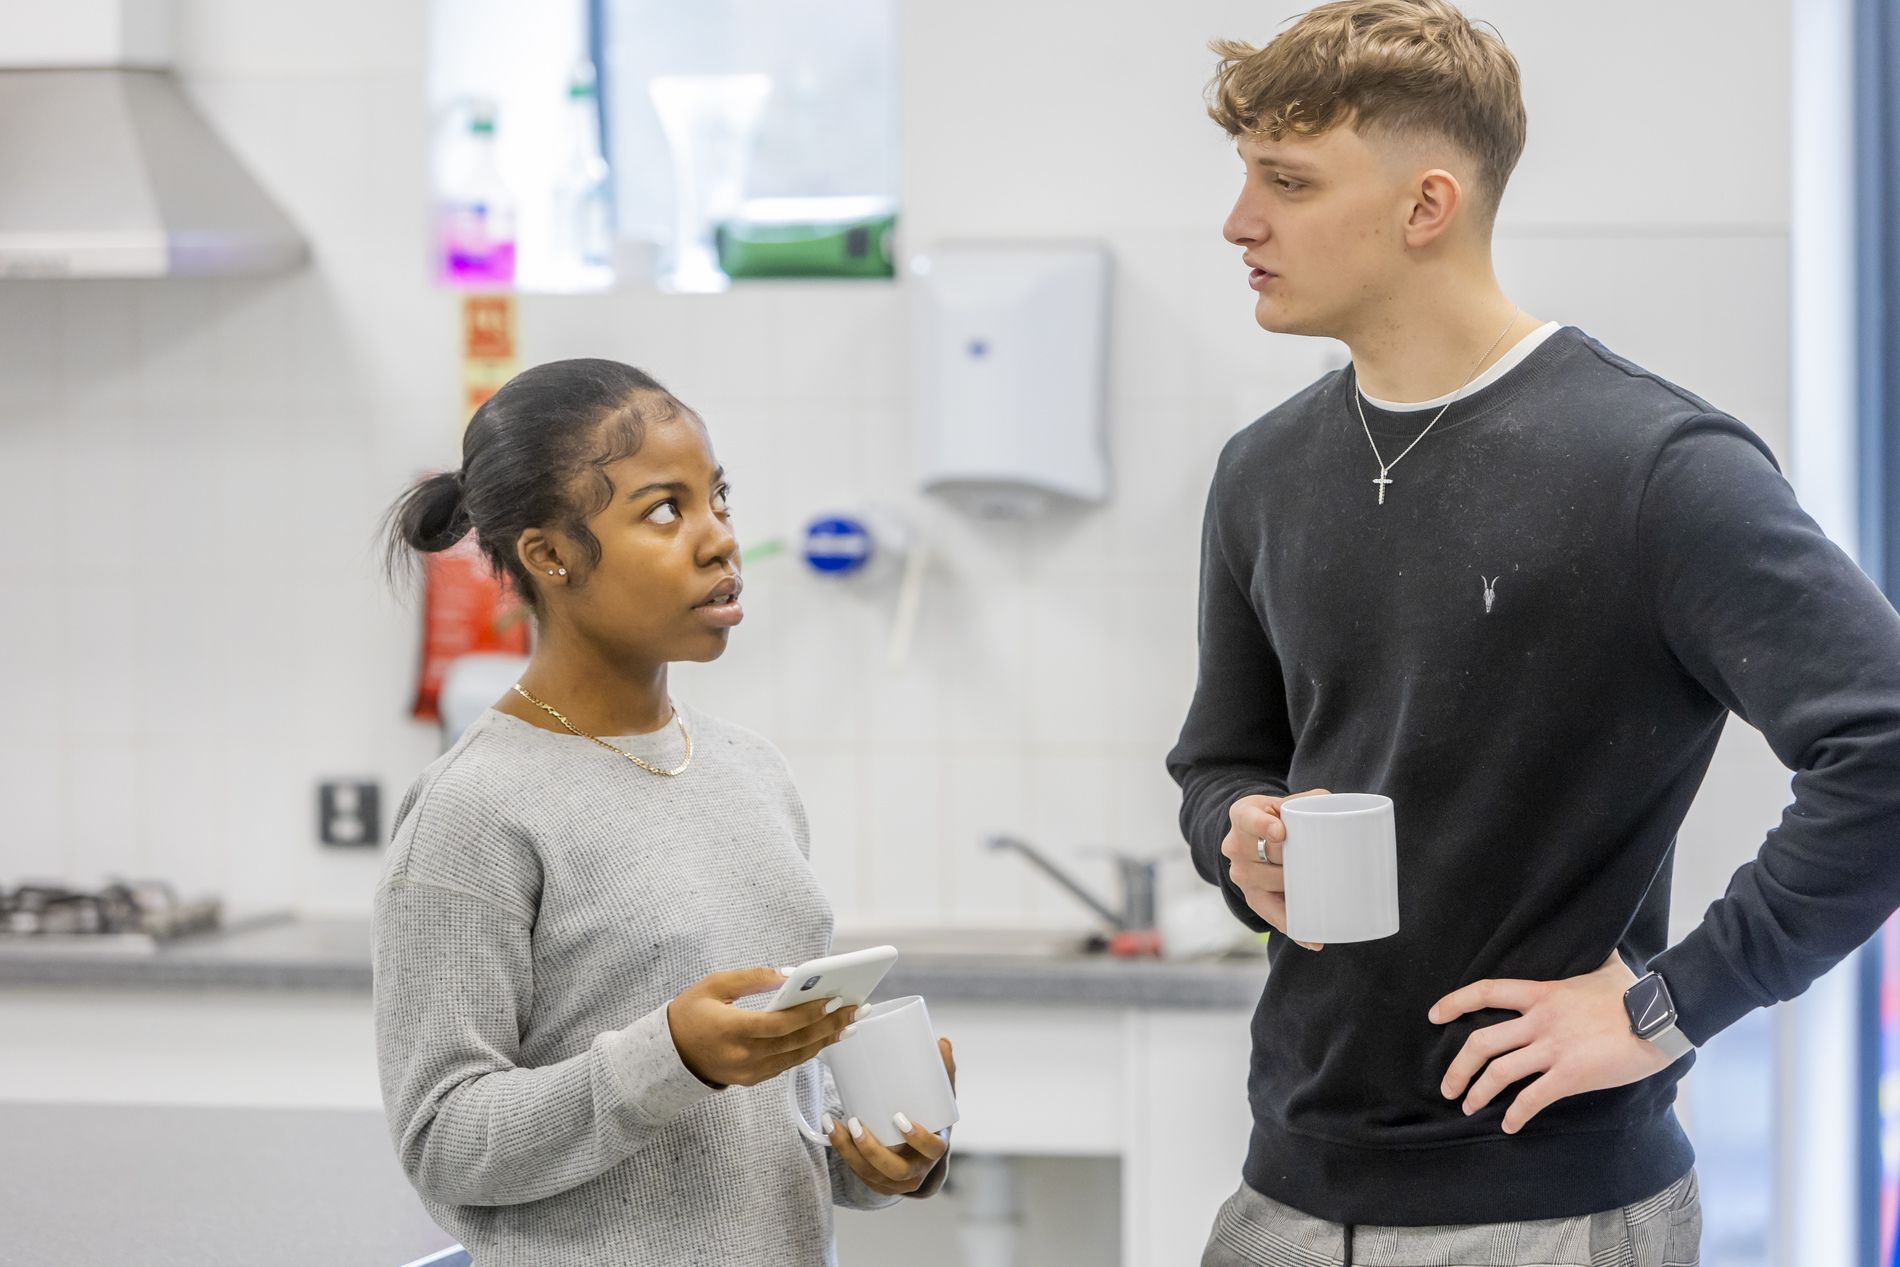 Two young people are talking about feeling lonely at Christmas. One is holding a mug and the other is holding their phone